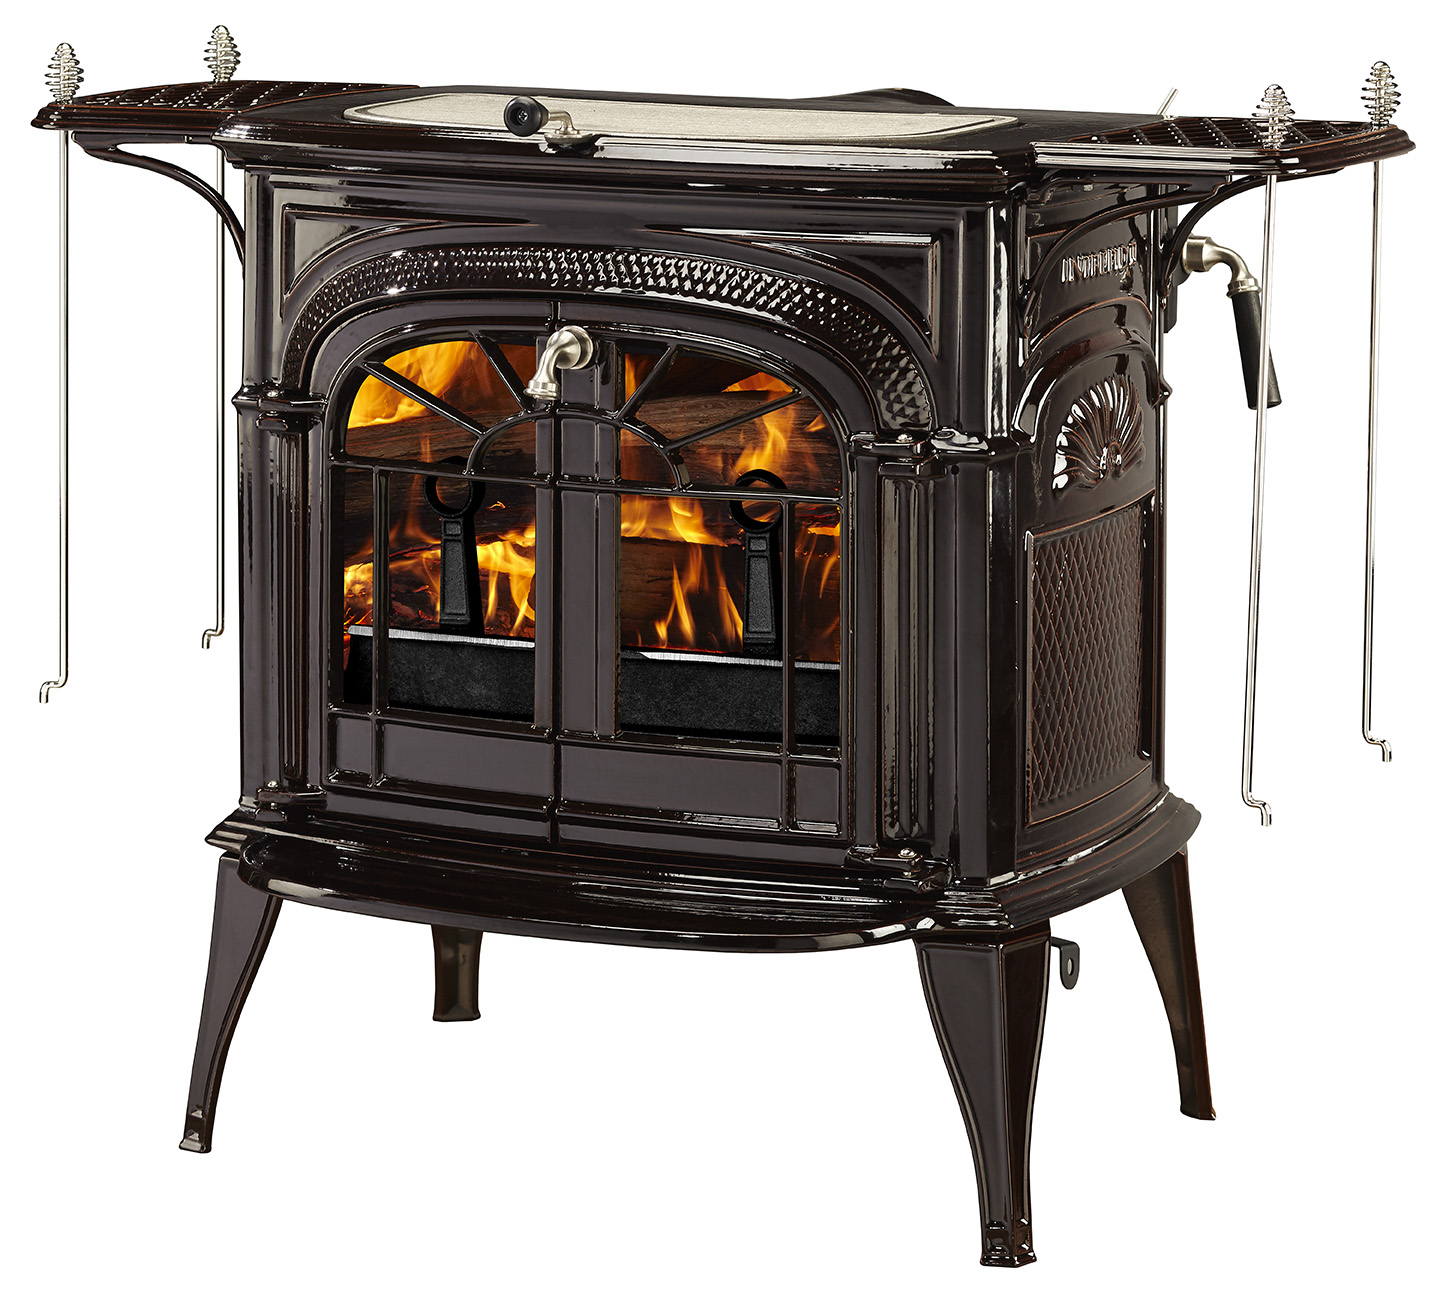 Timeless classic wood stoves - nutriDer